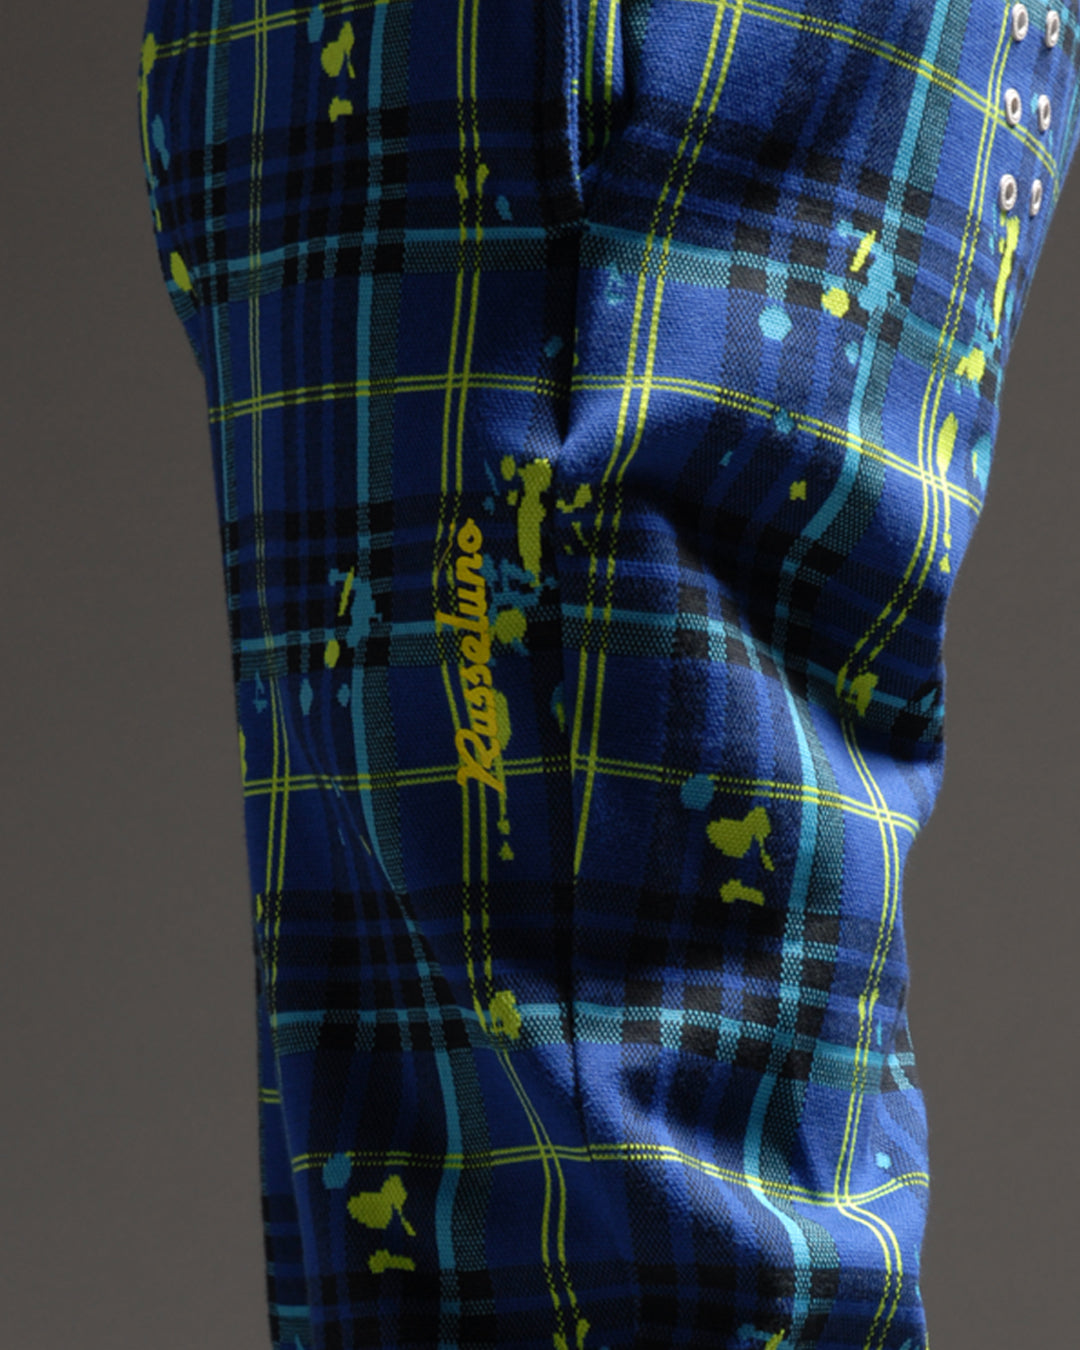 NEON CHECK PANTS – Russeluno Globel Official